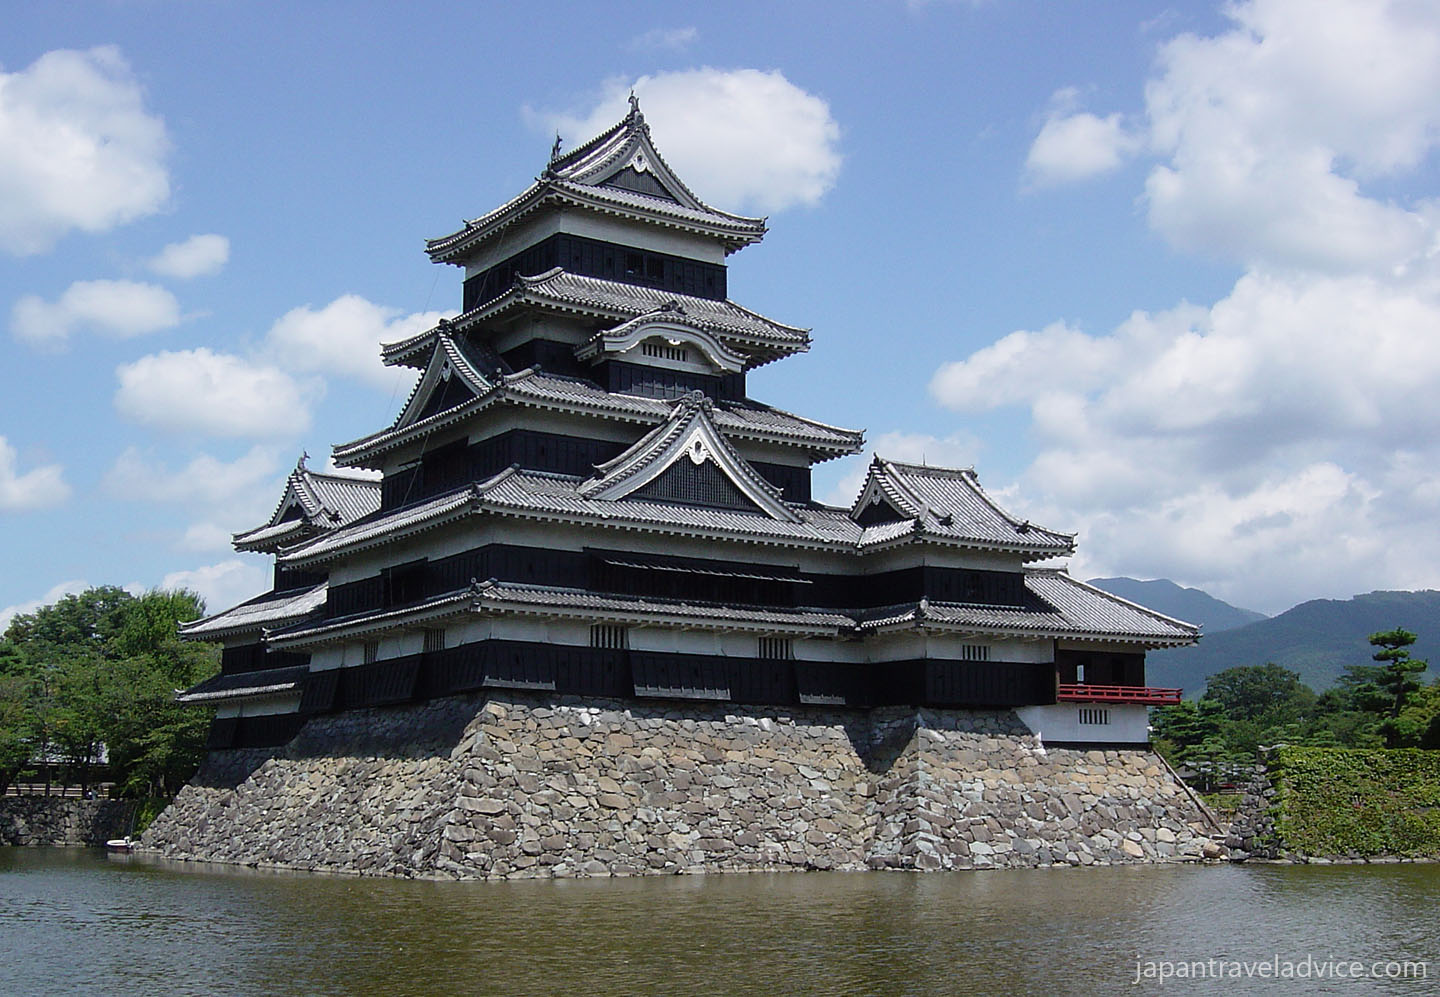 HD Quality Wallpaper | Collection: Man Made, 1440x997 Matsumoto Castle